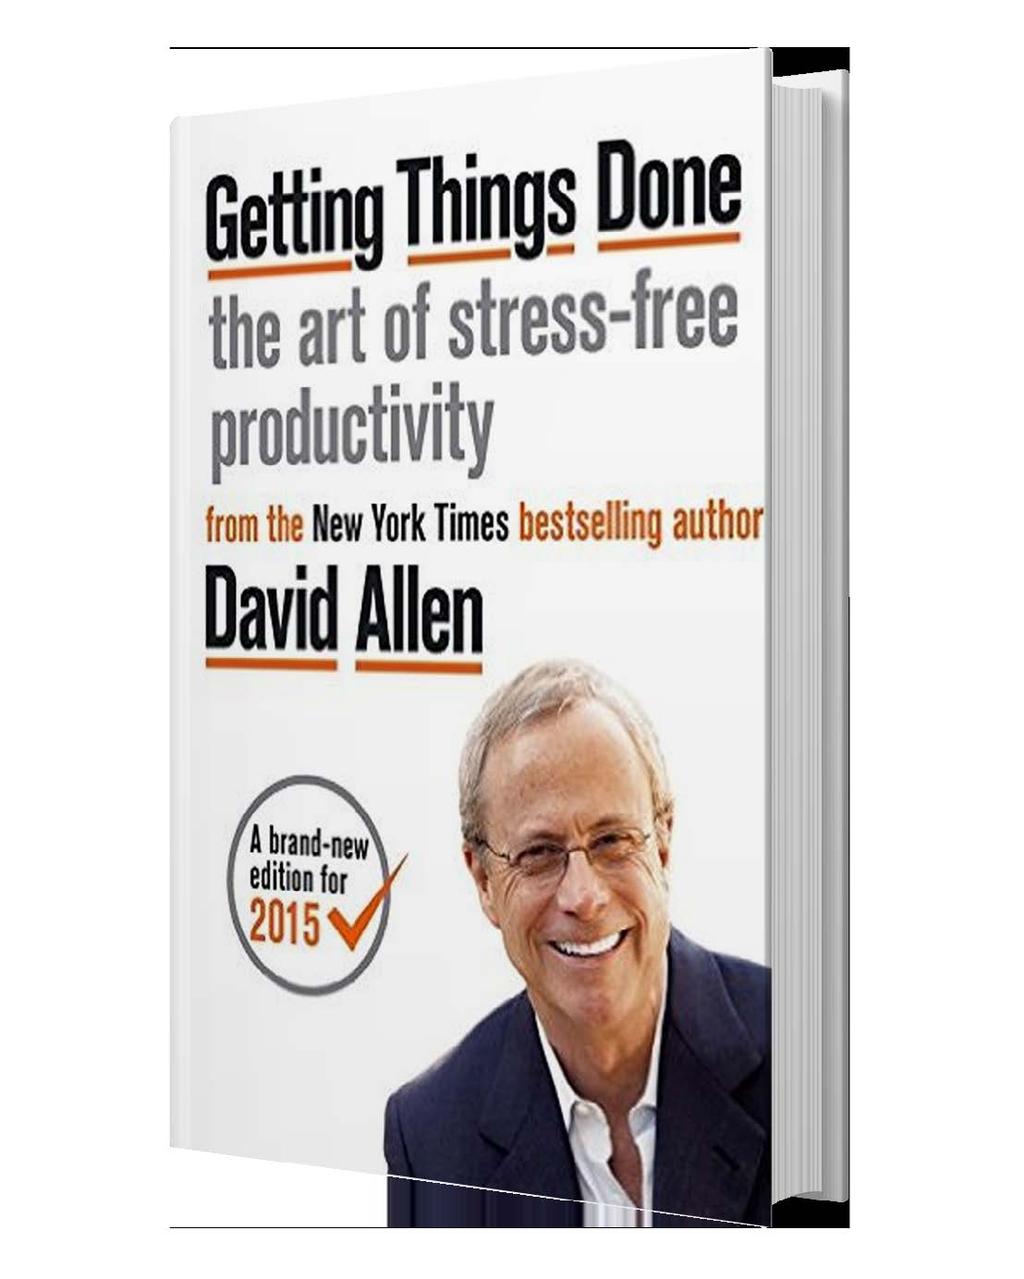 After reading David Allen s book called Getting Things Done - The